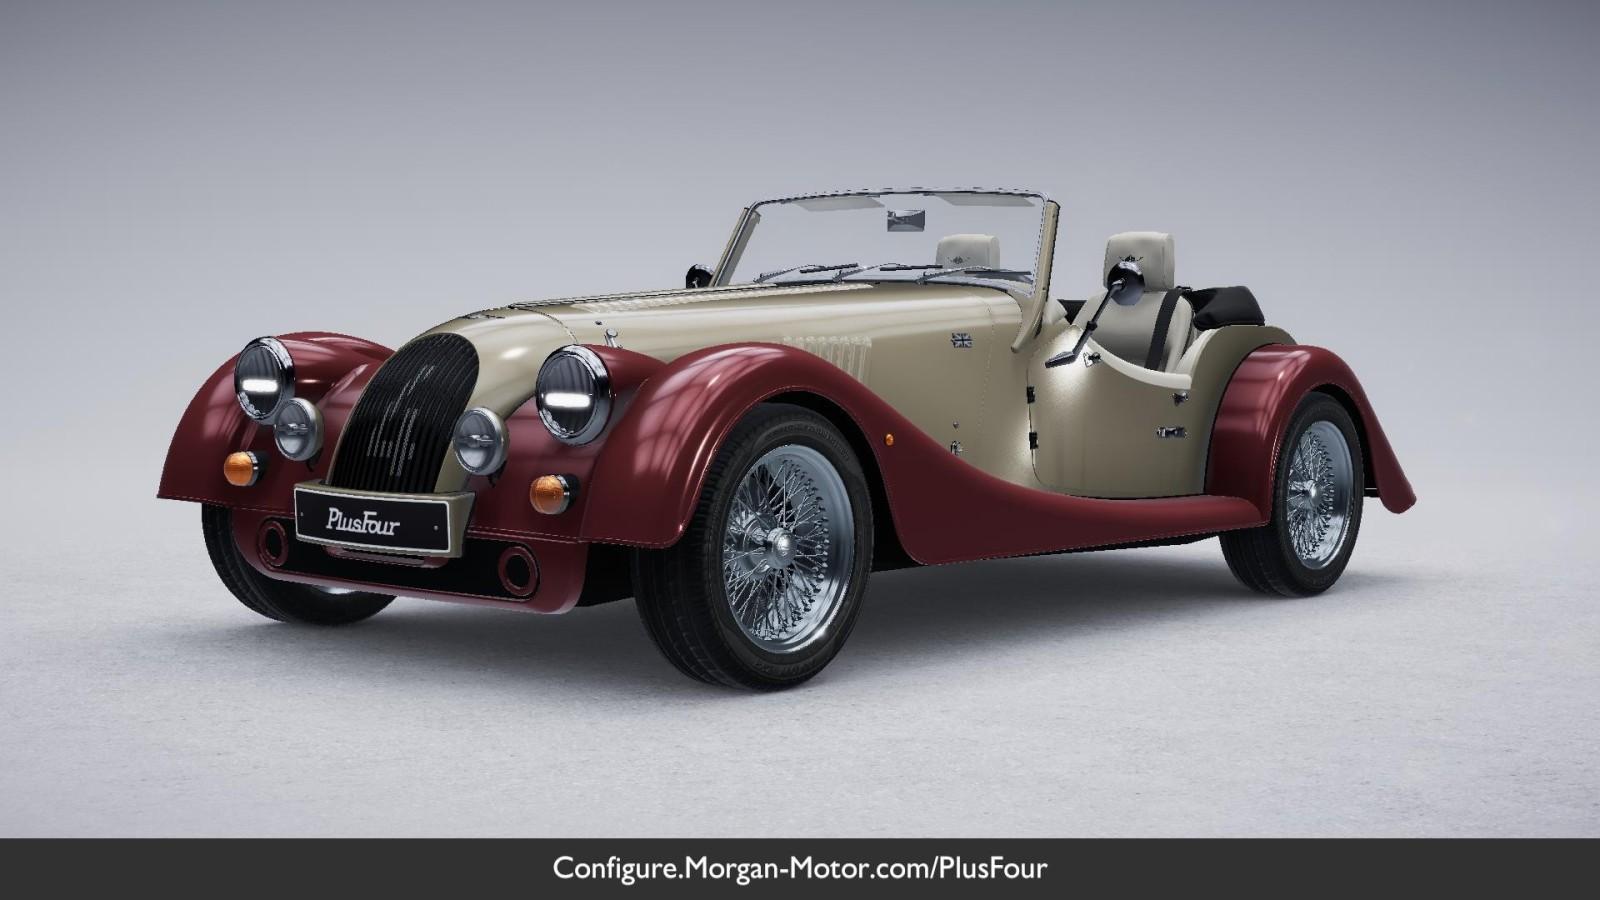 New 2023 Morgan Plus Four For Sale (Call for price) | Naples ...